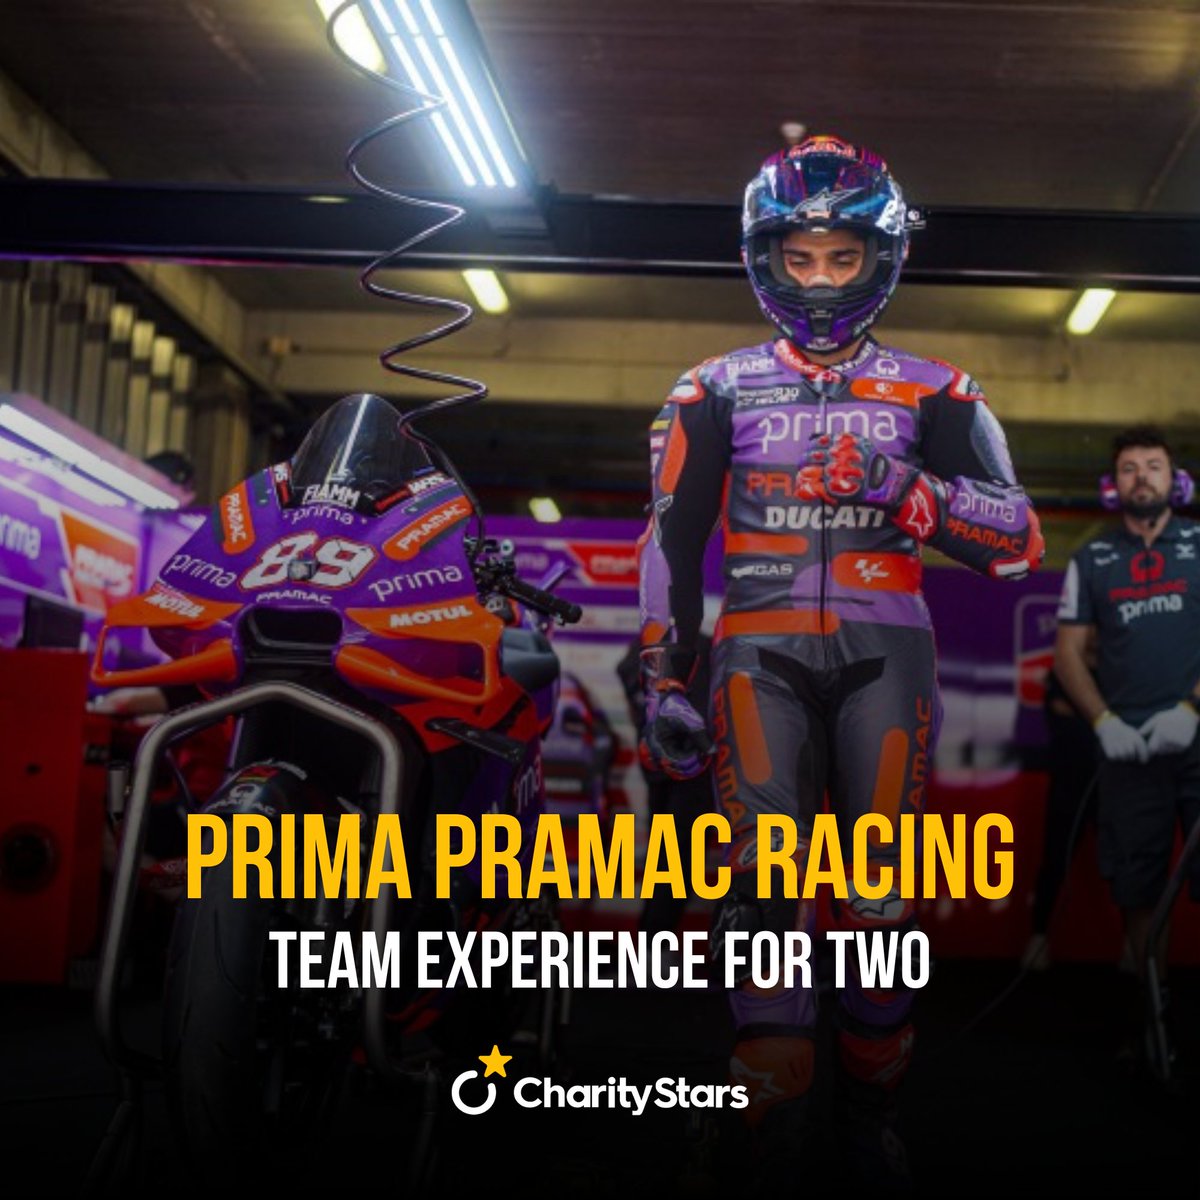 🤔 Ever wondered what it would be like to spend a race weekend with a MotoGP team? 🏍 Well, now @2WheelsforLife & @pramacracing are giving you that chance at the next Michelin® Grand Prix of France 🙌
👉 charitystars.com/product/prima-…!
#CharityStars #TwoWheelsForLife #PrimaPramacRacing